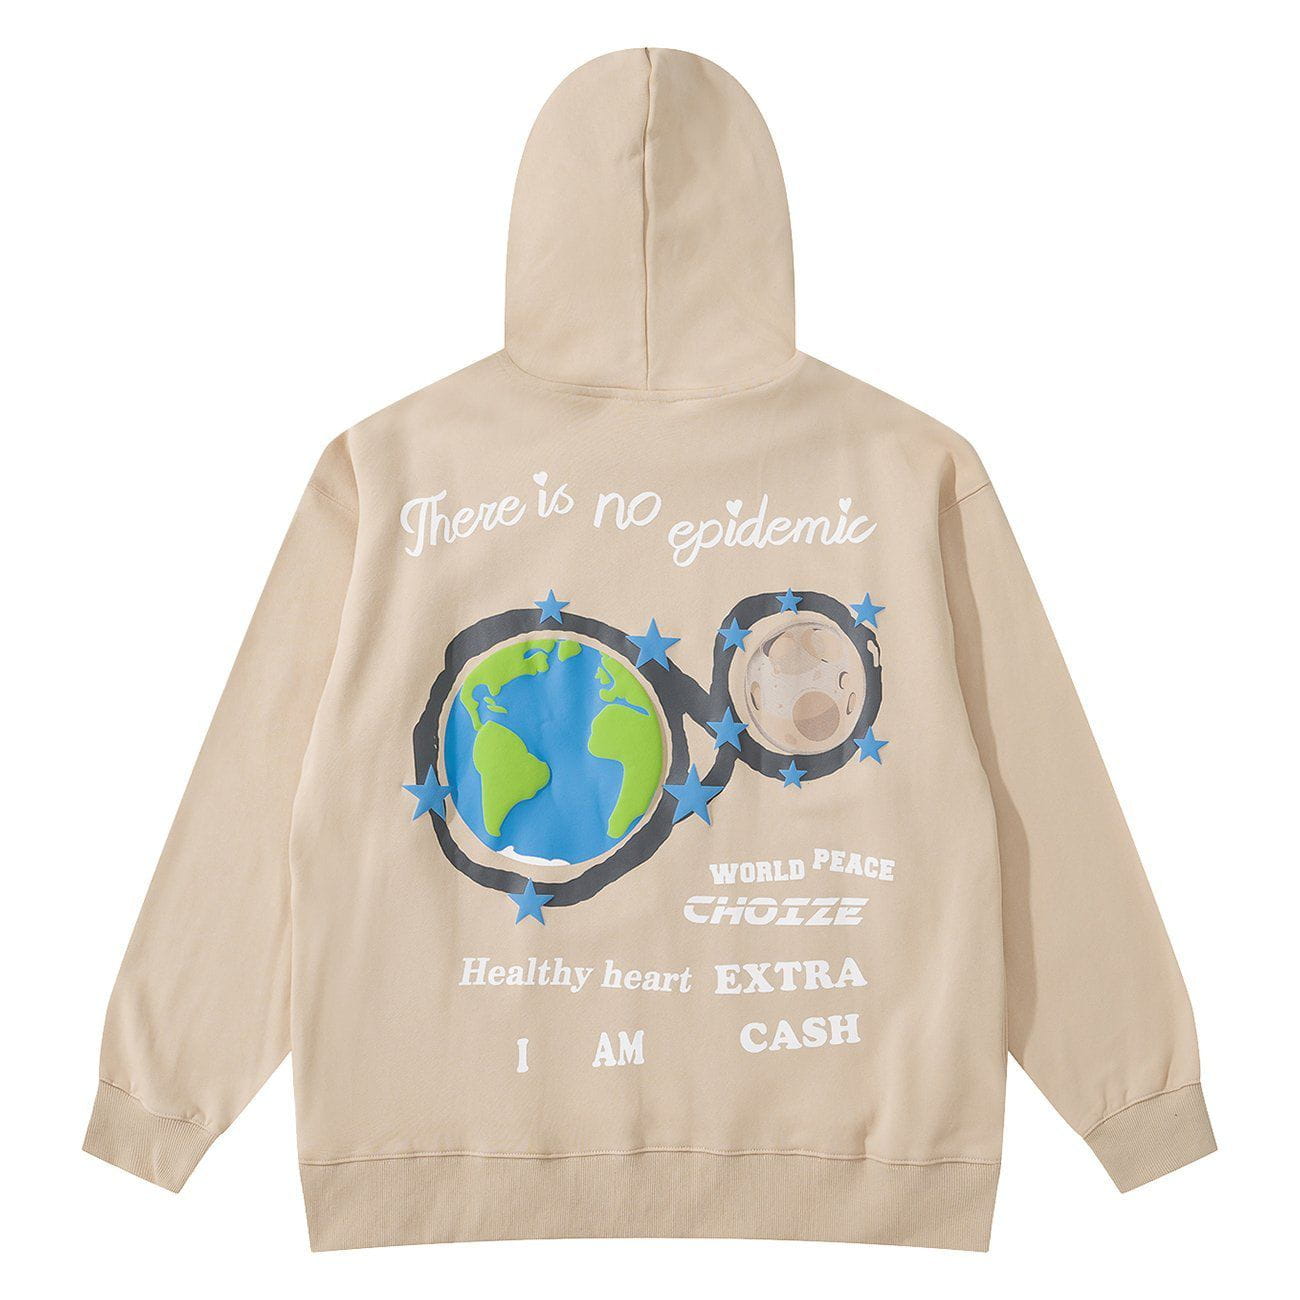 LUXENFY™ - Earth Planet Print Hoodie luxenfy.com